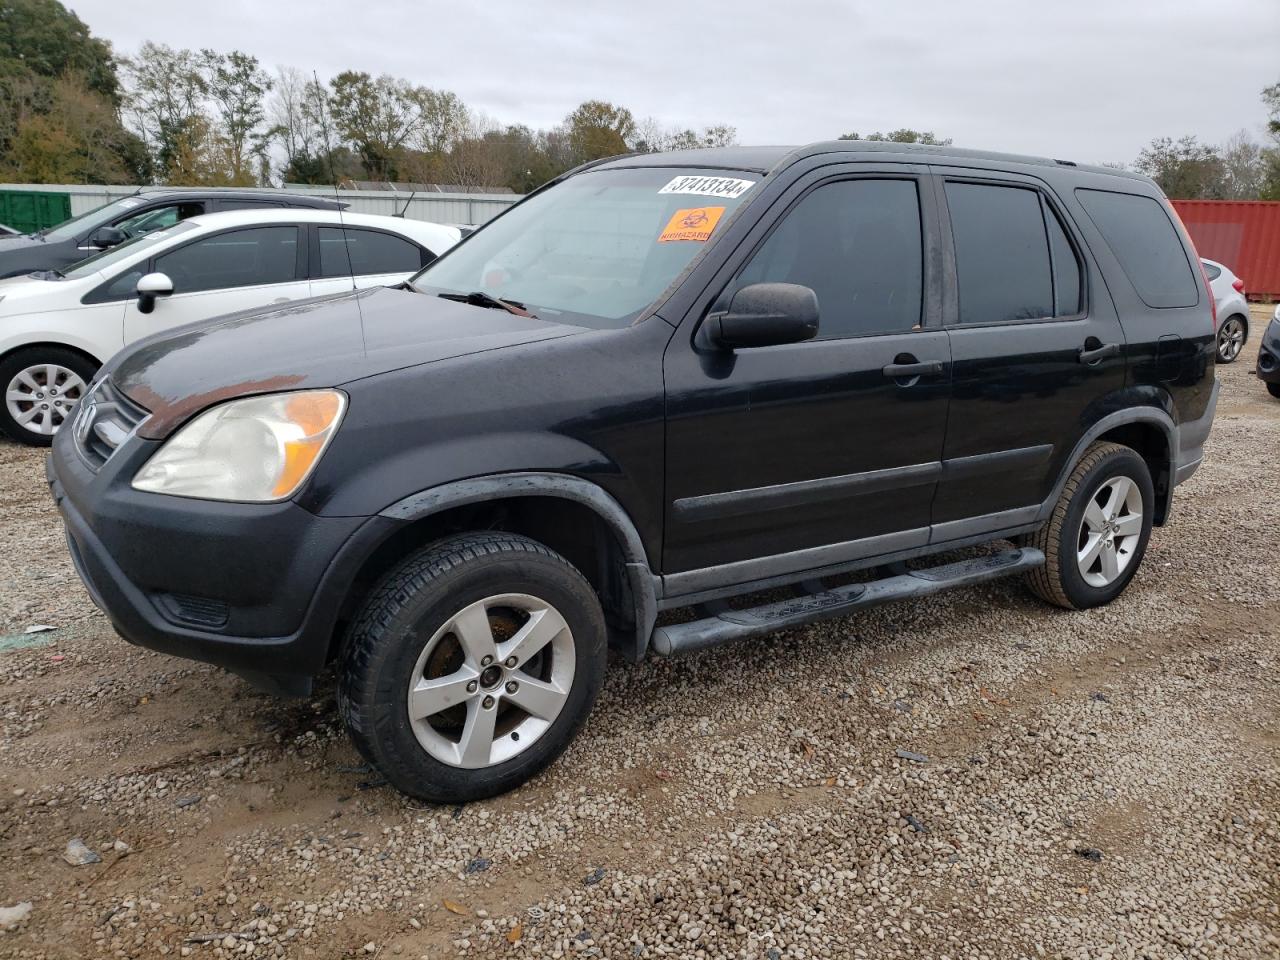 JHLRD68473C****** Salvage and Wrecked 2003 Honda CR-V in AL - Theodore